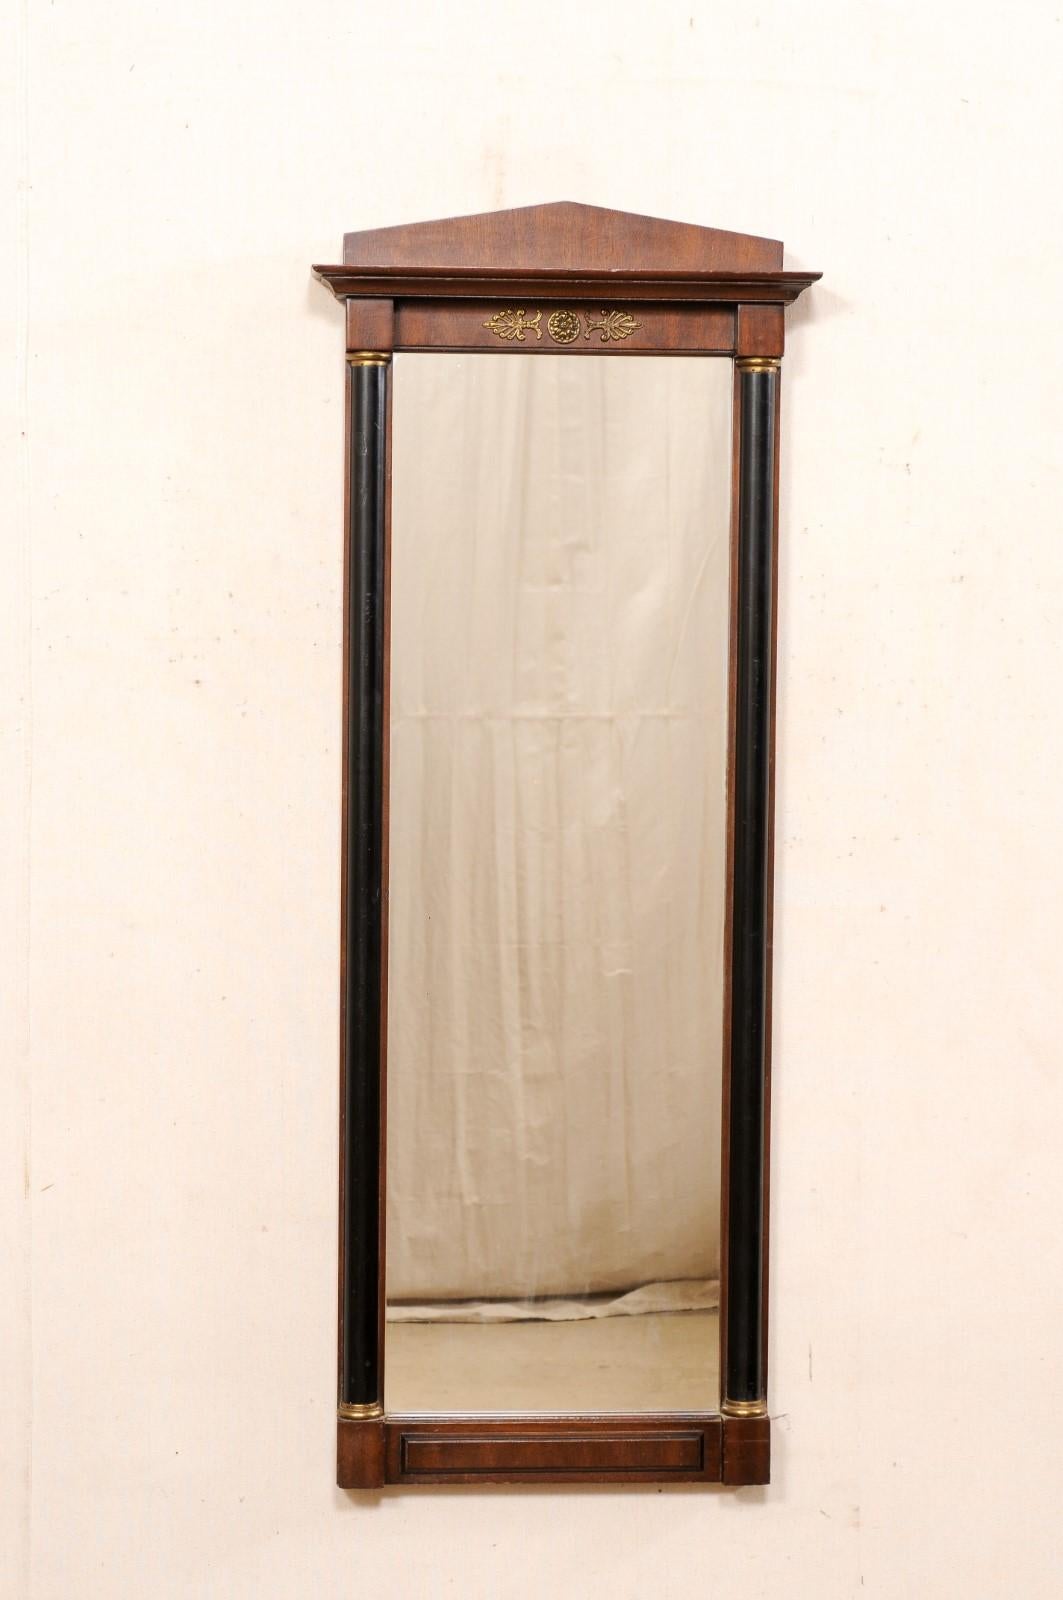 A Swedish Neoclassical-style wood mirror with brass accents from the early 20th century. This antique mirror from Sweden features a triangular pediment style crest with molded overhang adorning its top. The mirror is rectangular in shape, having a